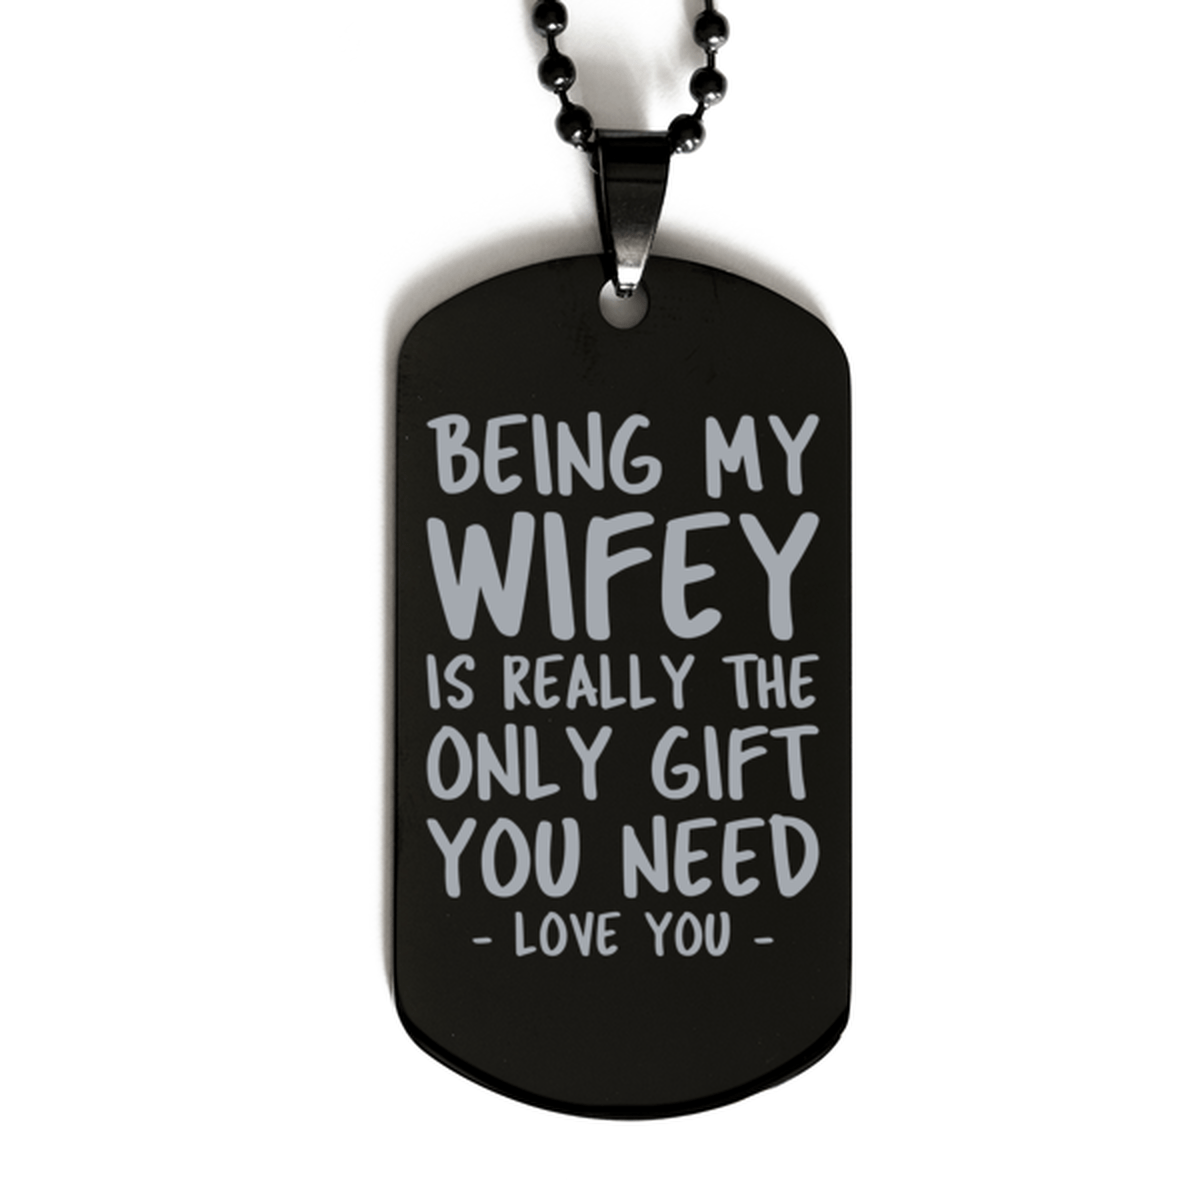 Funny Wifey Black Dog Tag Necklace, Being My Wifey Is Really the Only Gift You Need, Best Birthday Gifts for Wifey